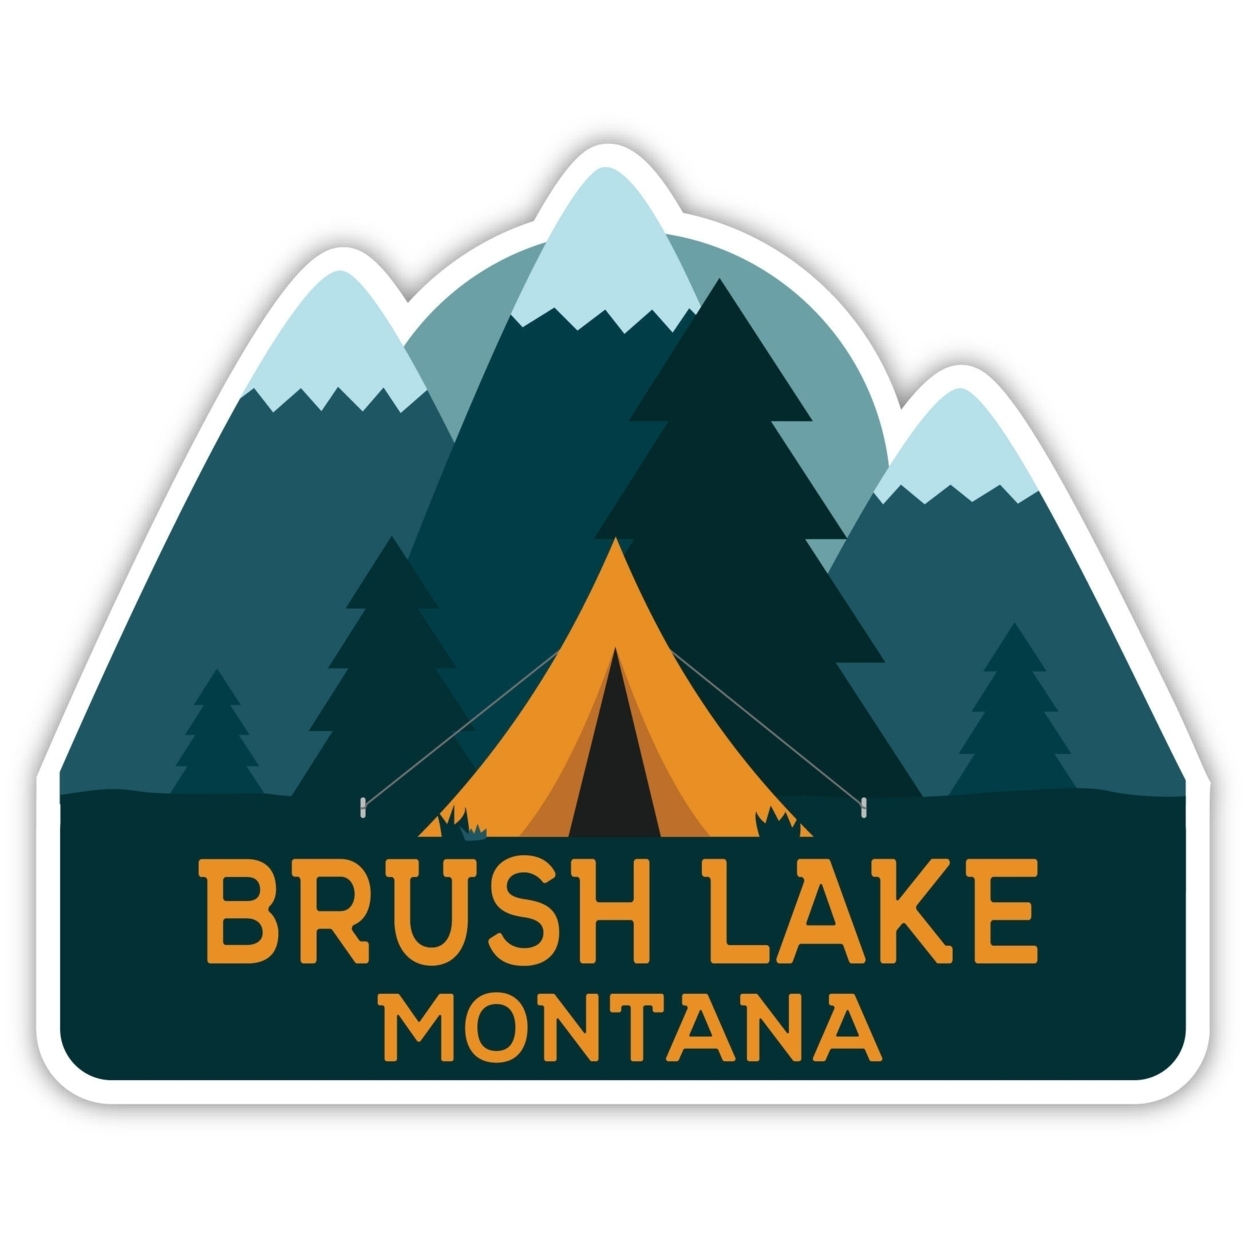 Brush Lake Montana Souvenir Decorative Stickers (Choose Theme And Size) - 4-Pack, 2-Inch, Tent